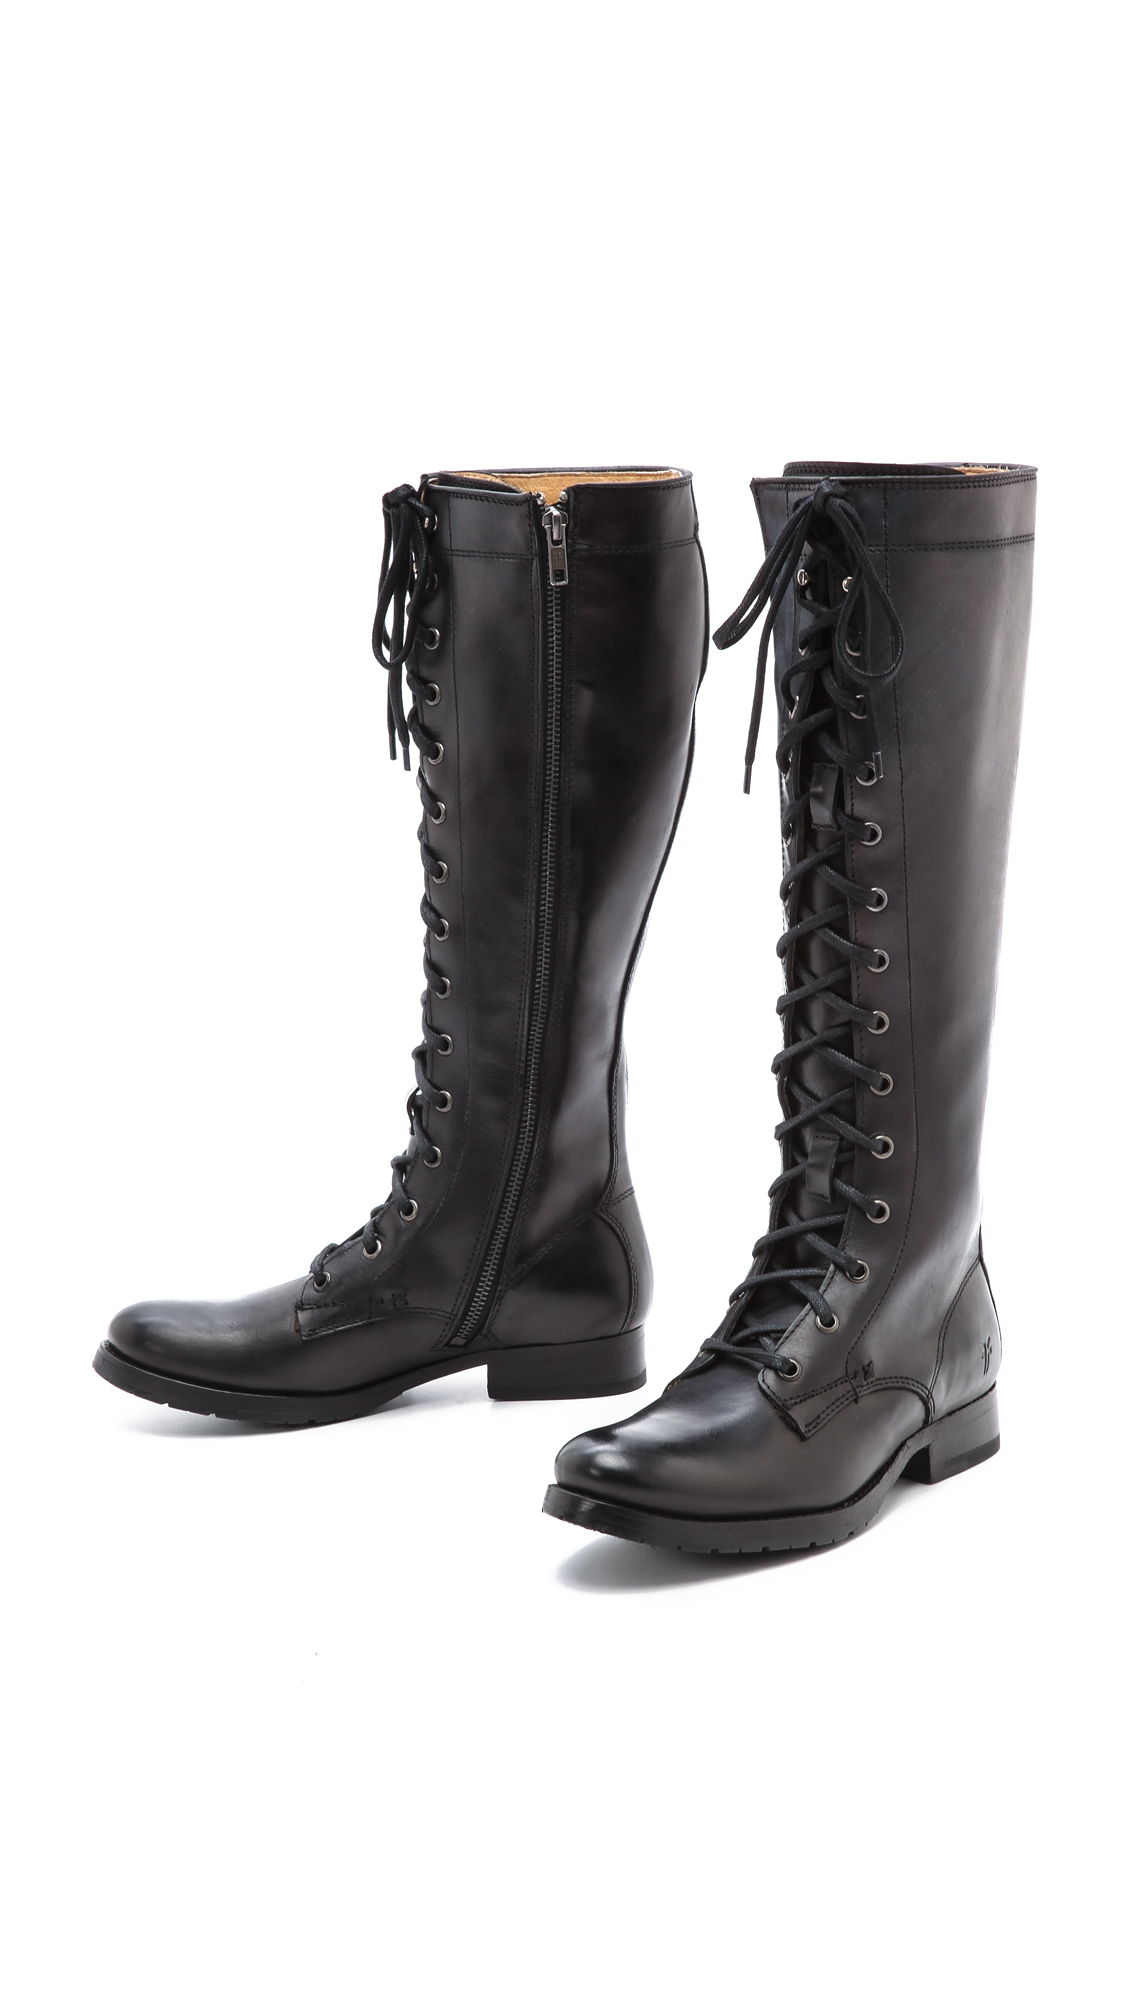 Lyst - Saint laurent Patti Leather Army Boots in Black